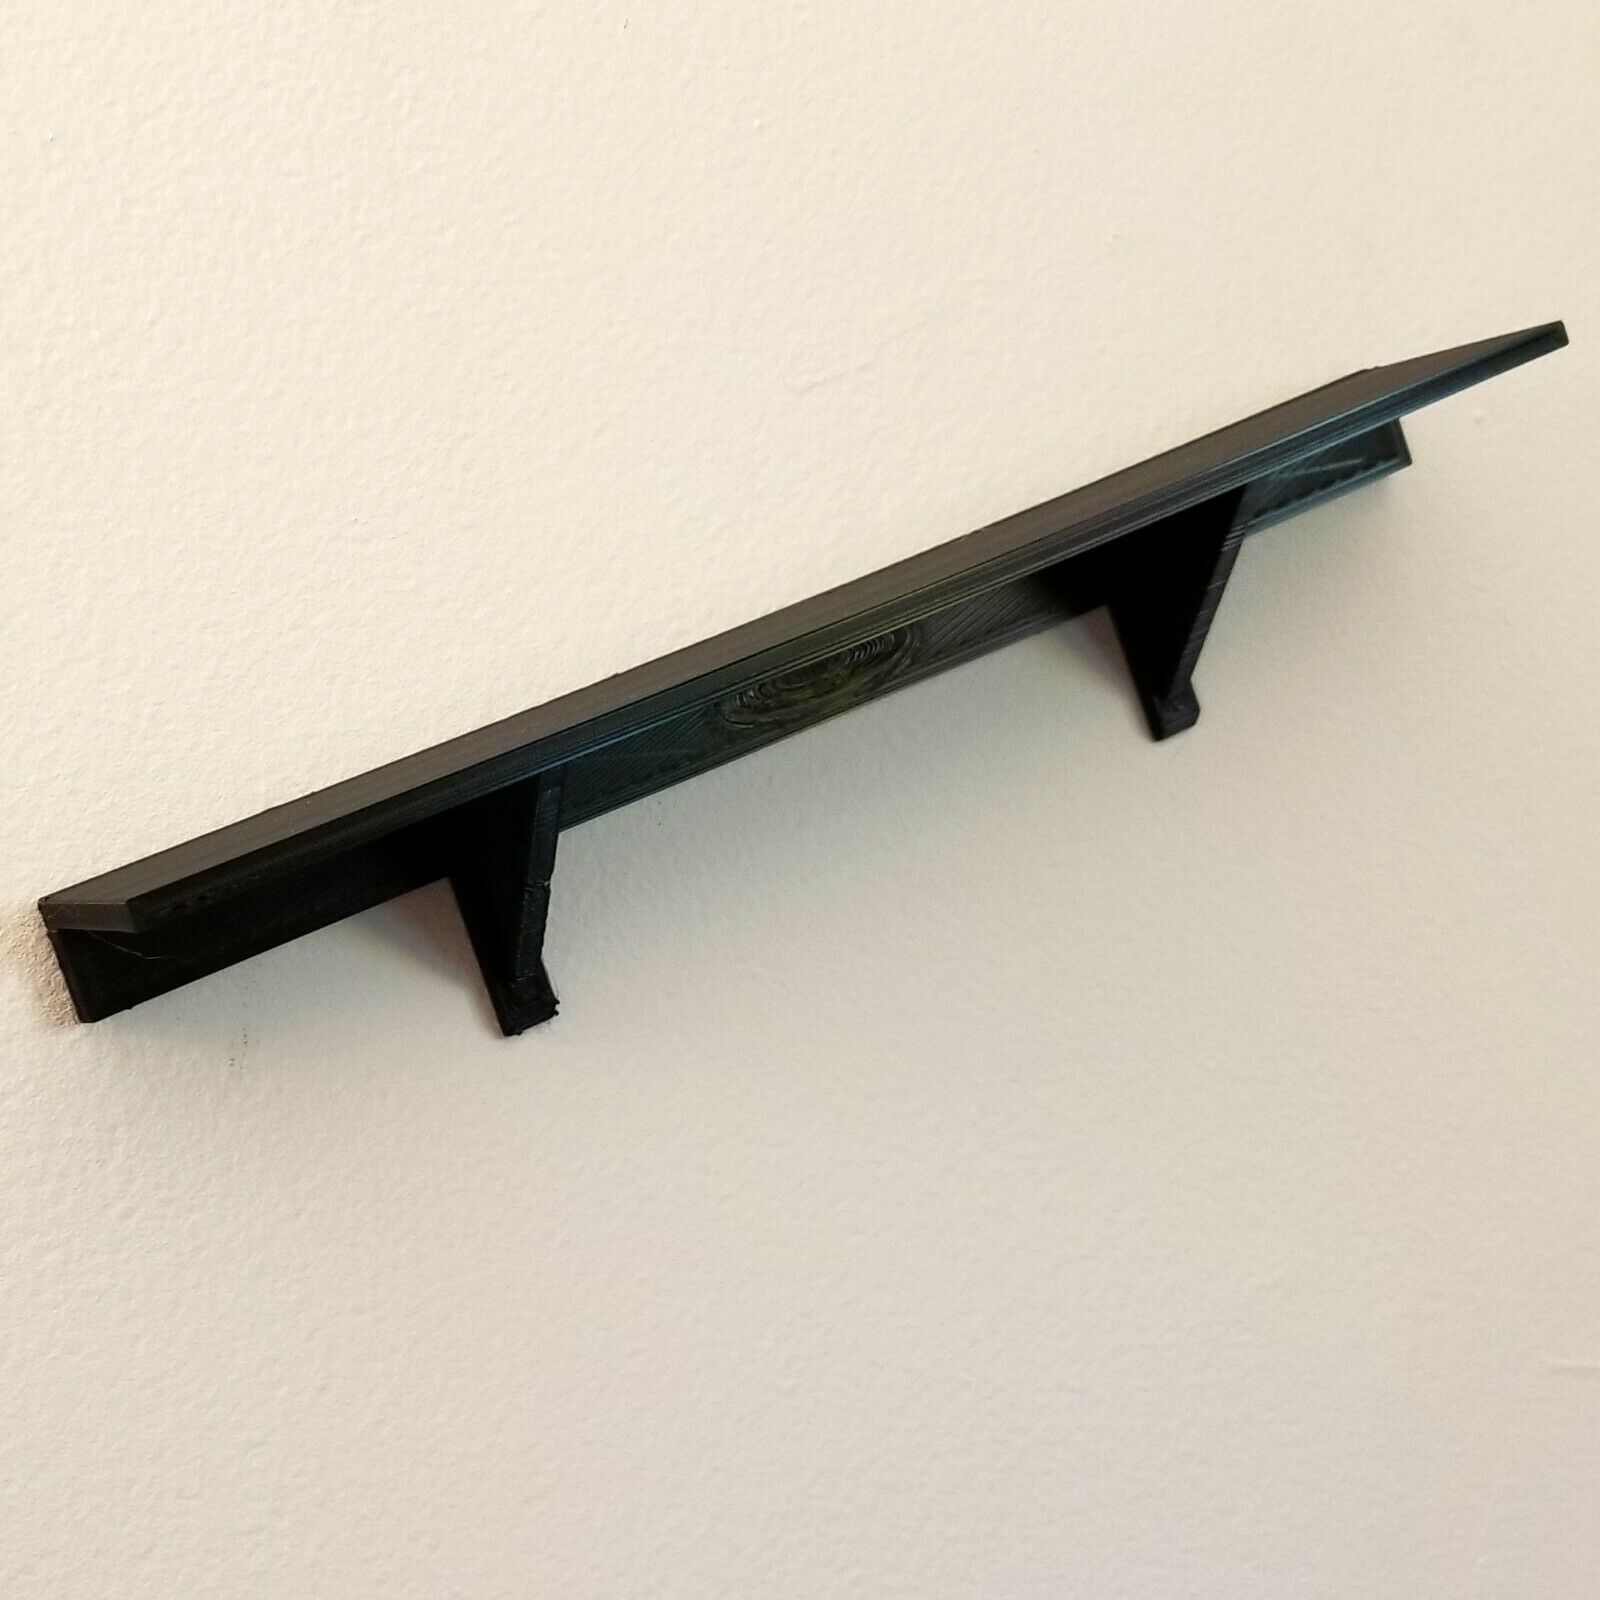 12" X 2" Black Wall Shelf Uses 3m Command Strips Are Removable & Easy To Install